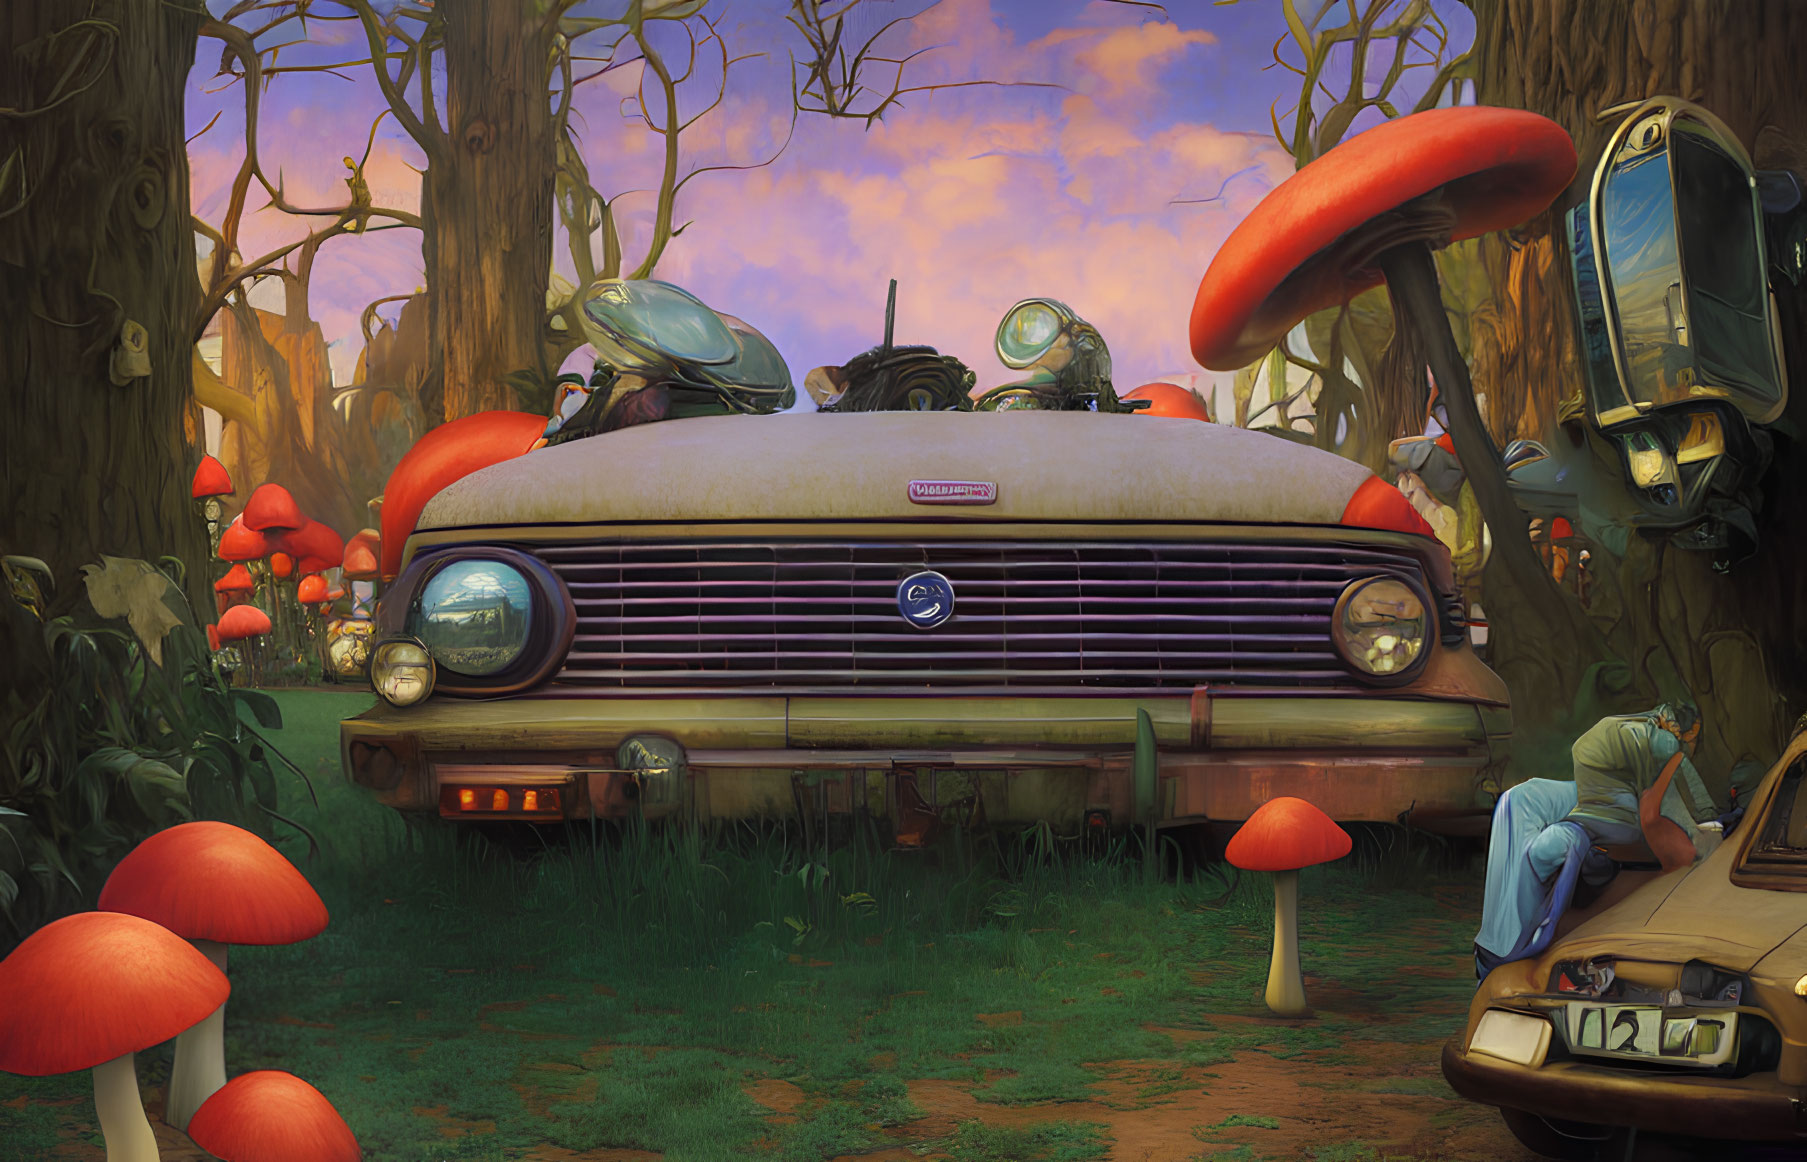 Vintage Car in Enchanted Forest with Oversized Mushrooms and Floating Objects